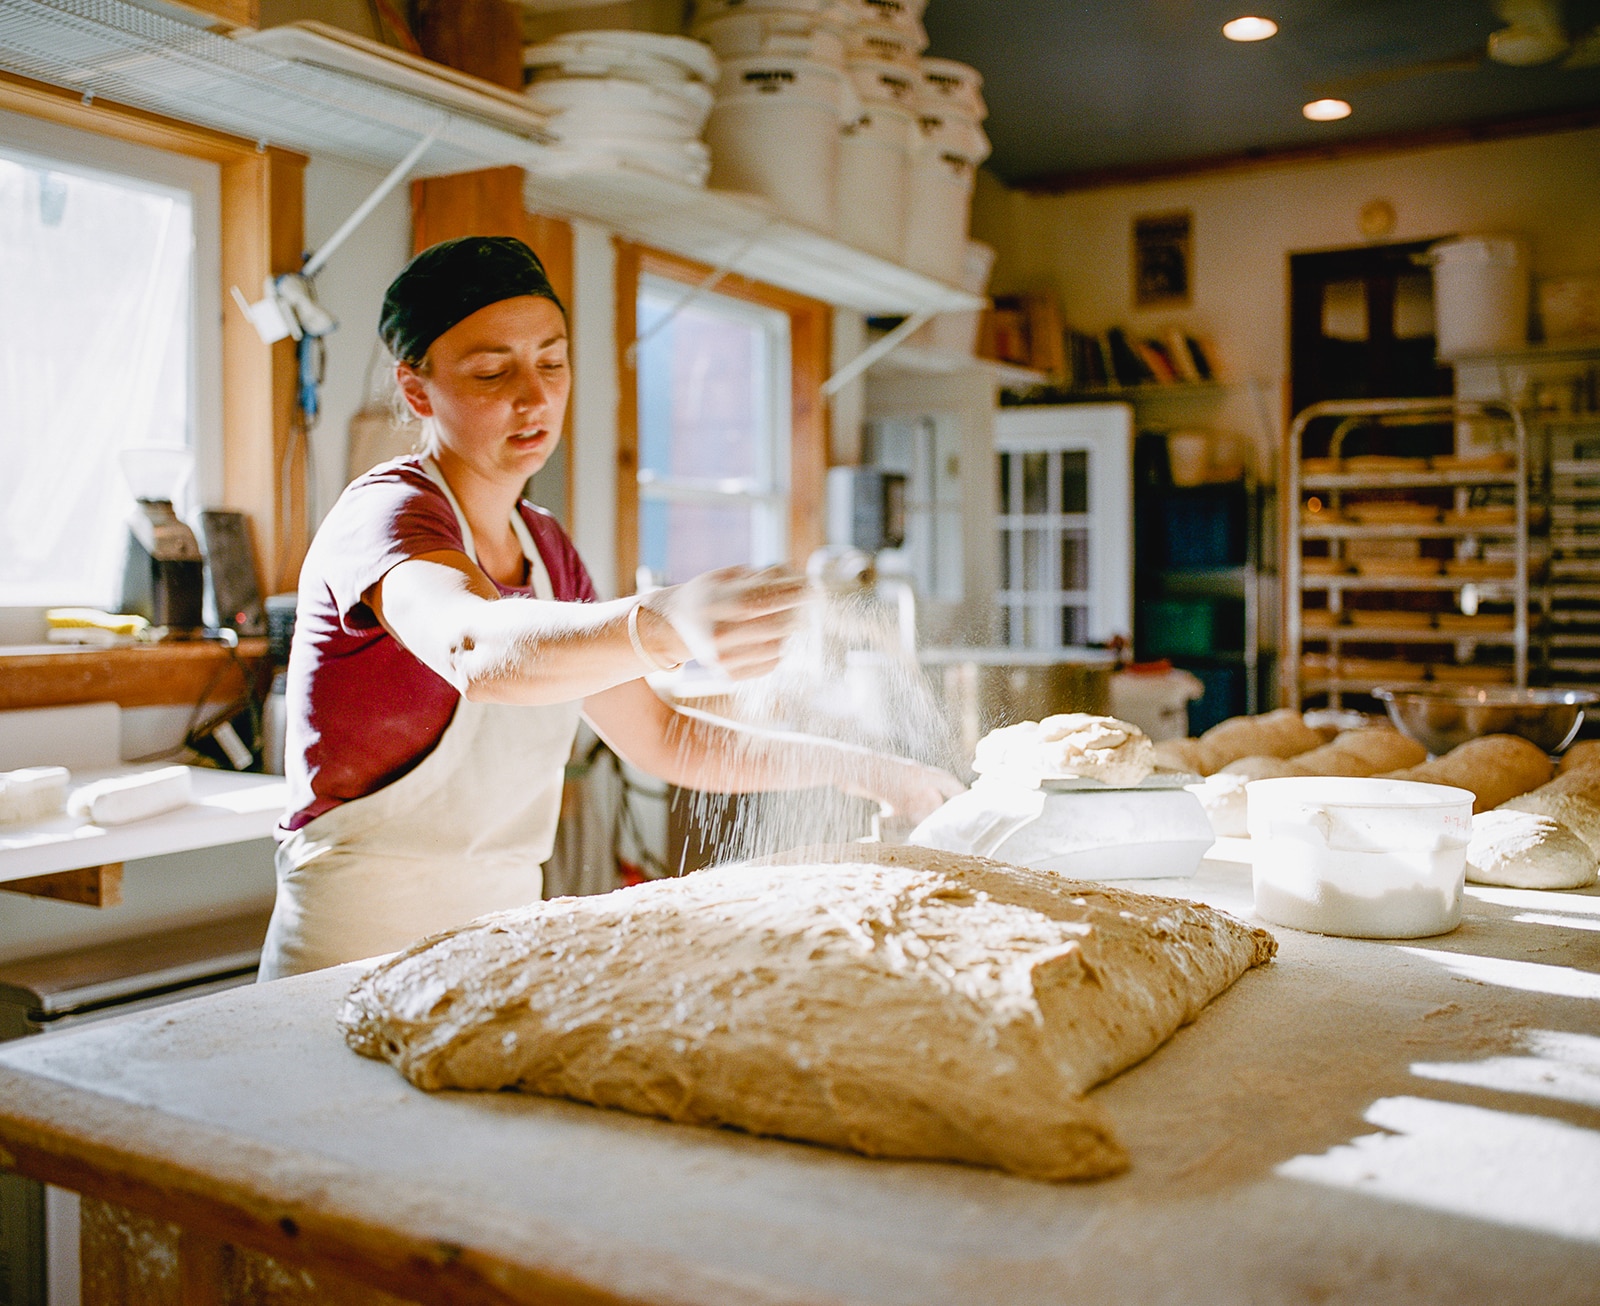 Title: Untitled, 2016 Location: Elmore, VT Judge's comments: "While some would see this image as being more commercial art than fine-art, some images can straddle multiple genres. One could see this photograph as editorial, since it illustrates the story behind a baker’s business. The image also stands alone as an environmental portrait of a New England baker. The artist utilizes the figure and the bread dough to capture our focus. A room bathed in light, a limited palette, the motion of the flour and the color of the baker’s red shirt combine to keep the viewer’s attention on the meditative action of bread-making and to create a sensation as if it were a moving image." 